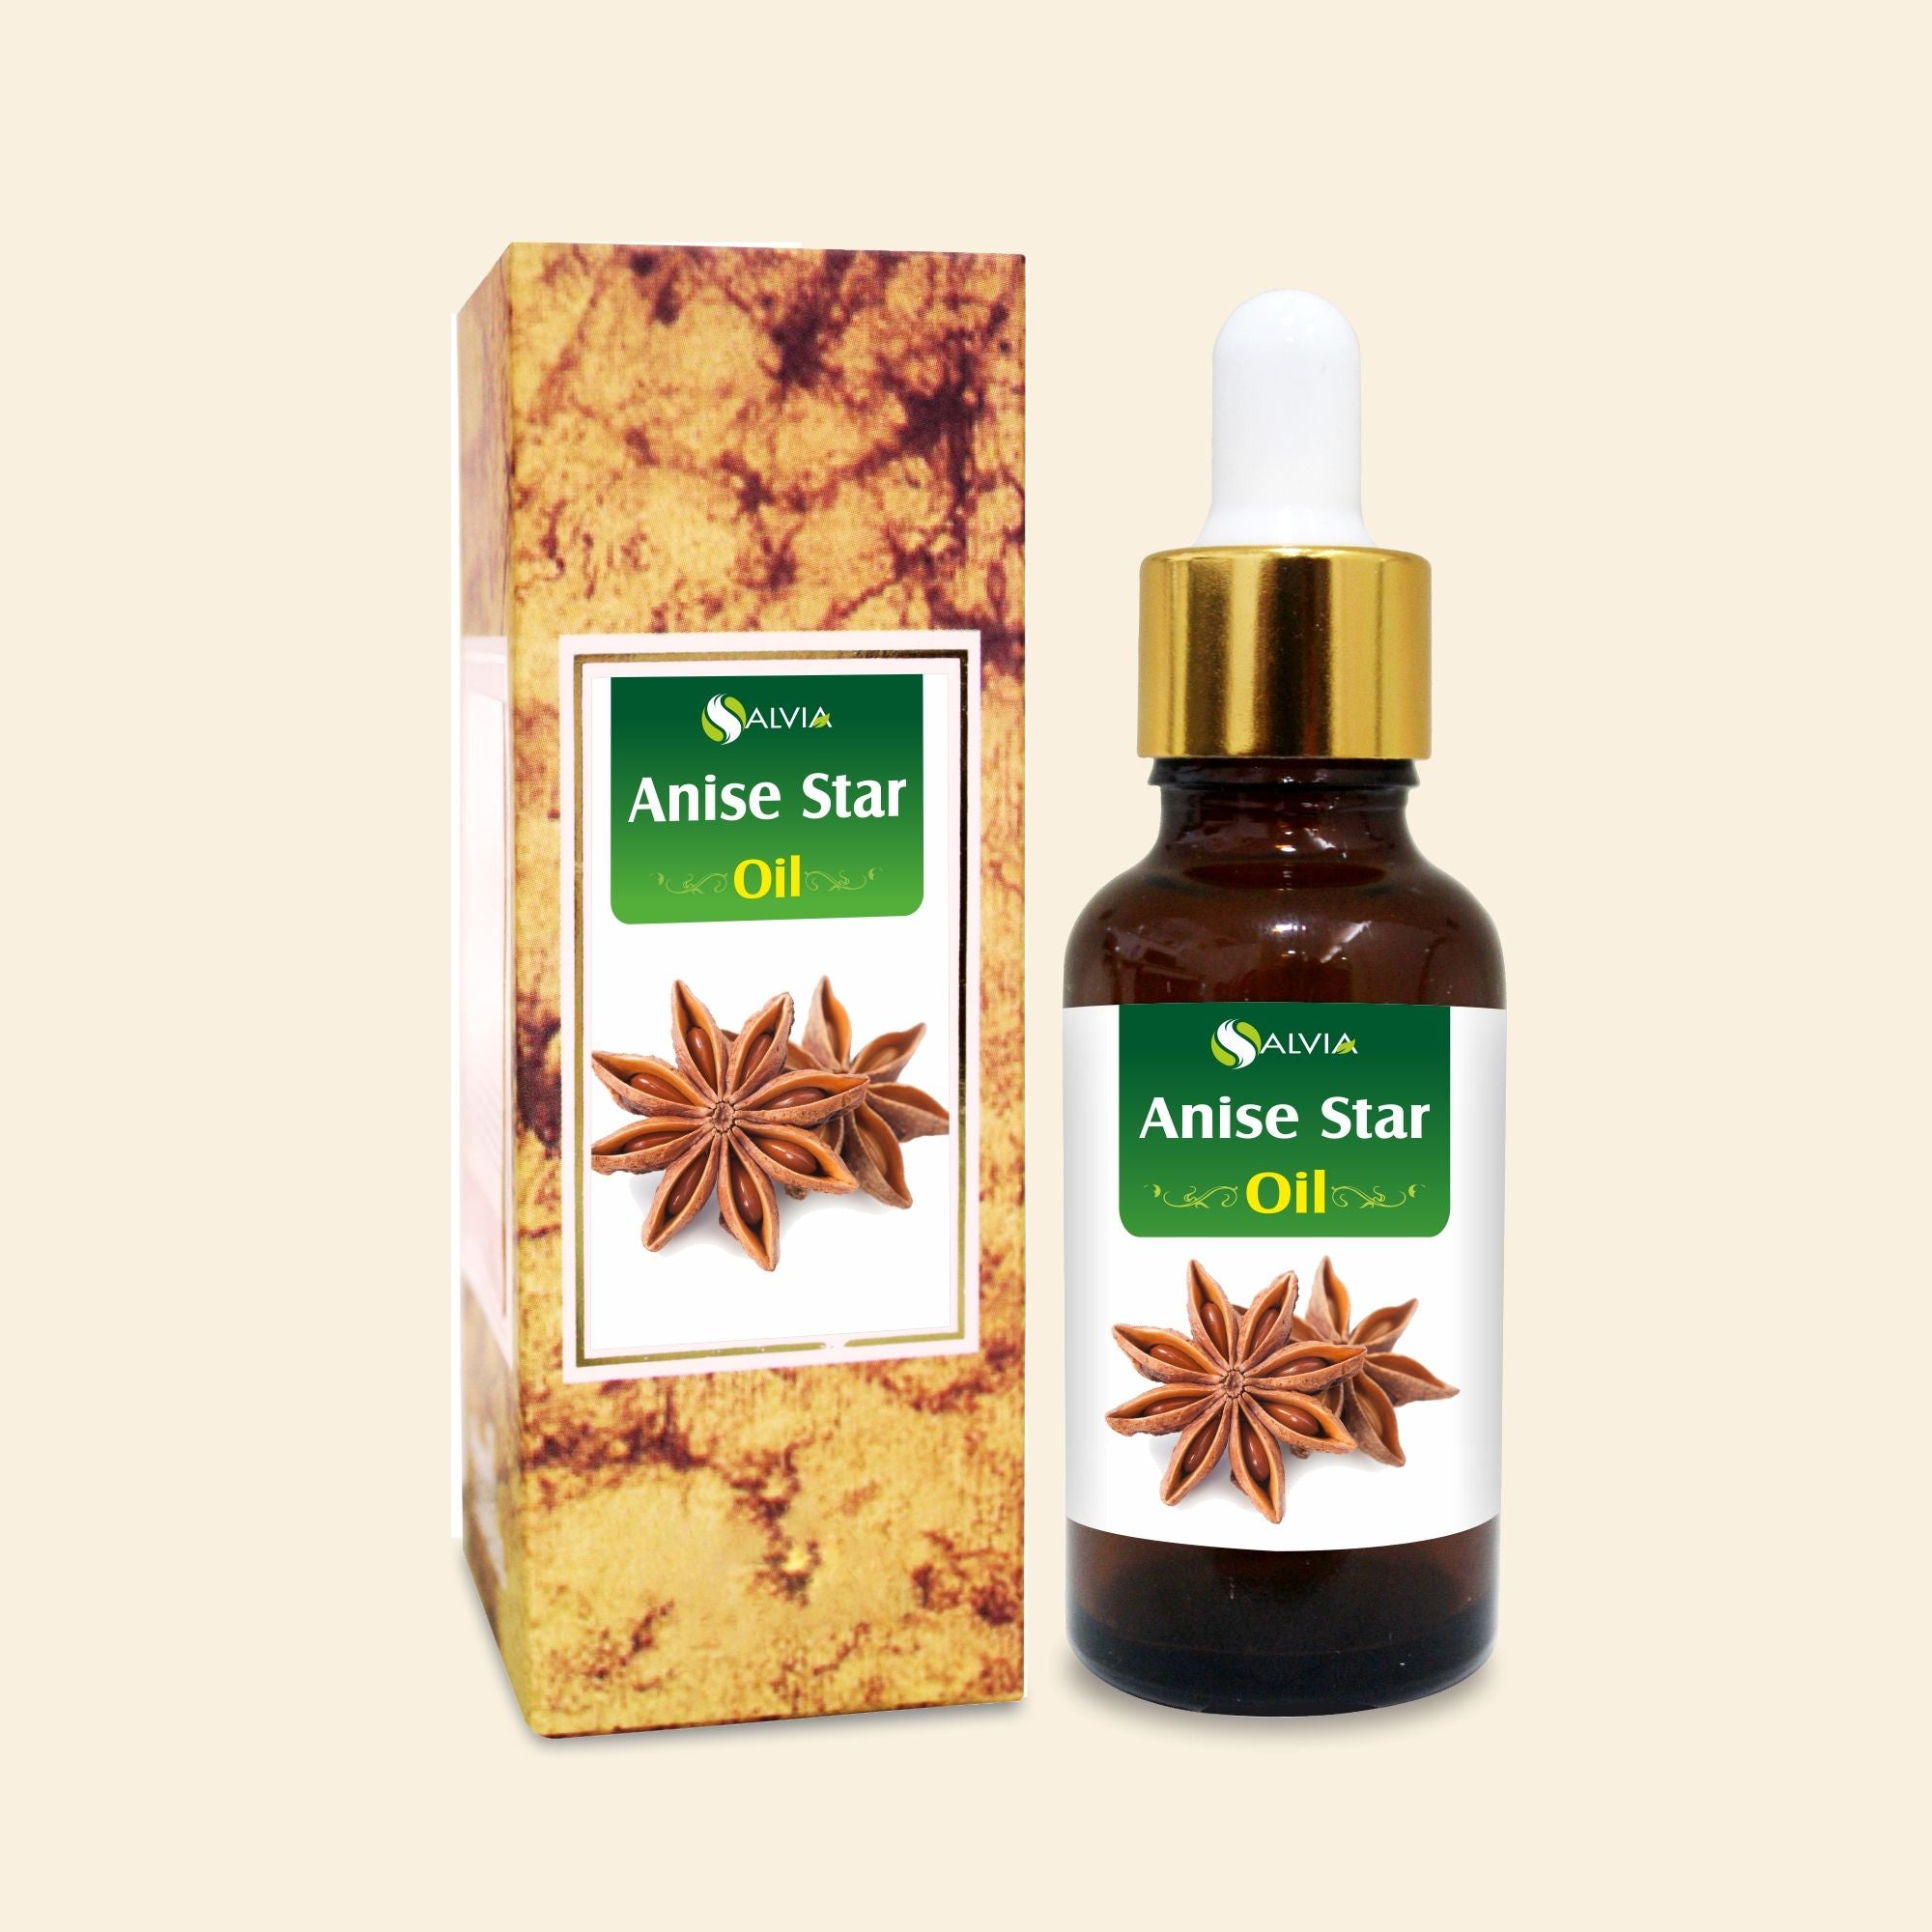 Salvia Natural Essential Oils Anise Star Essential Oil, 100% Pure Undiluted & Natural, For Aromatherapy, Eases Cough & Cold, Reduces Tension, Diminishes Acne